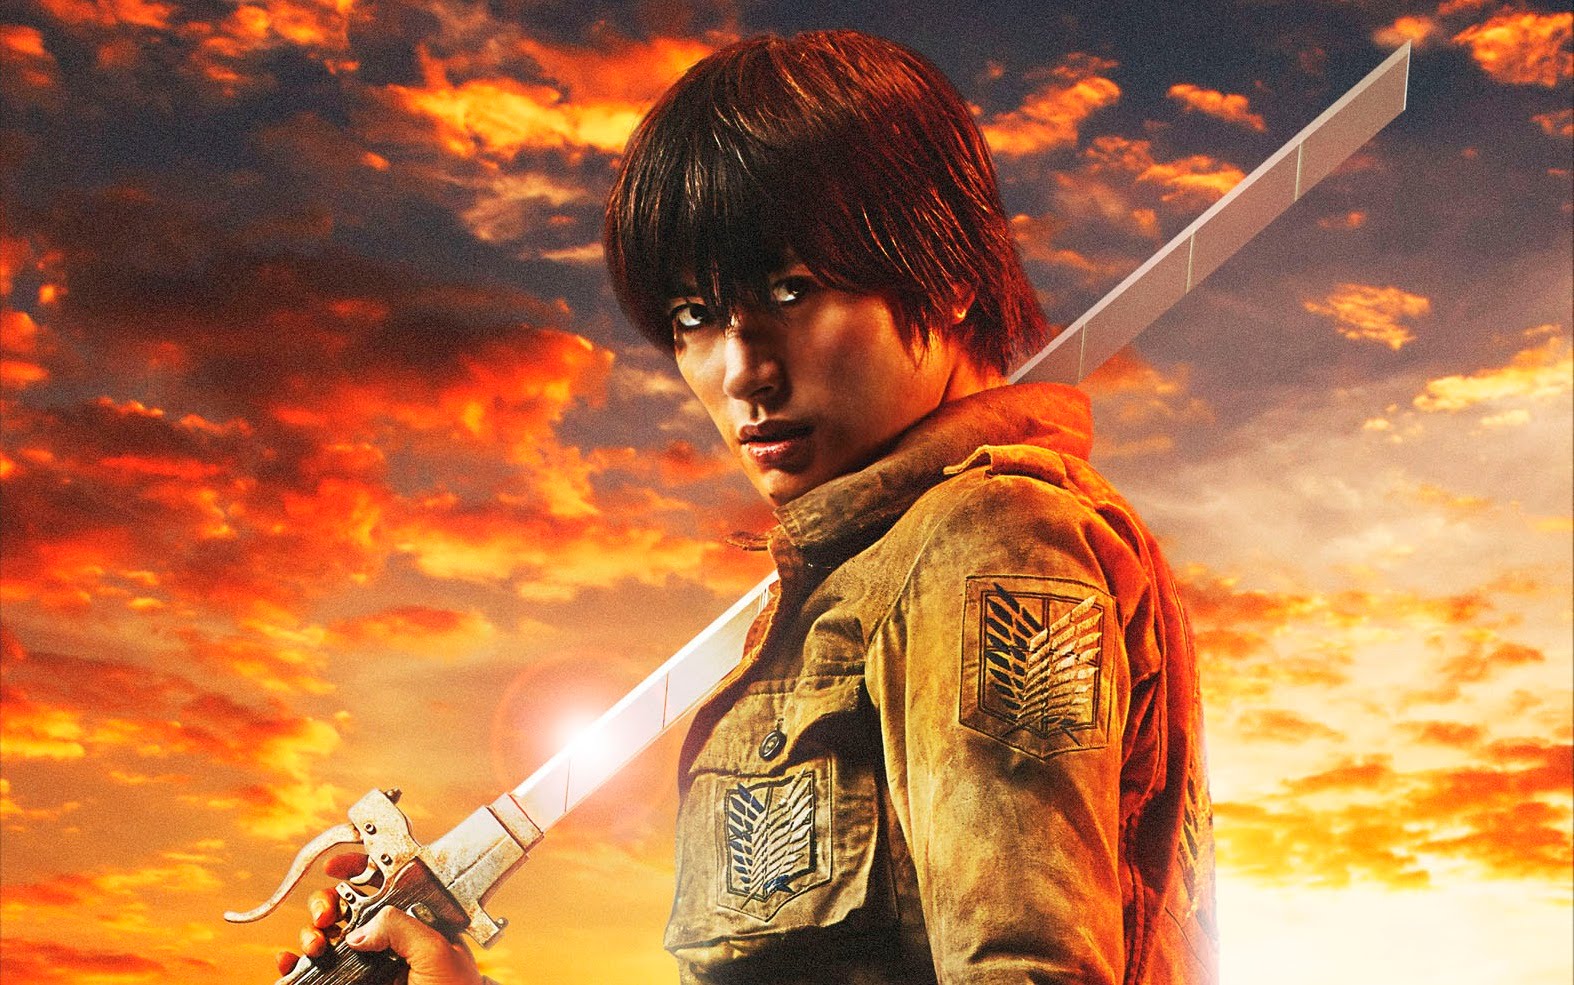 The First Trailer Video for “Attack on Titan” Live-action Movie Revealed & Release Date Scheduled for This August!